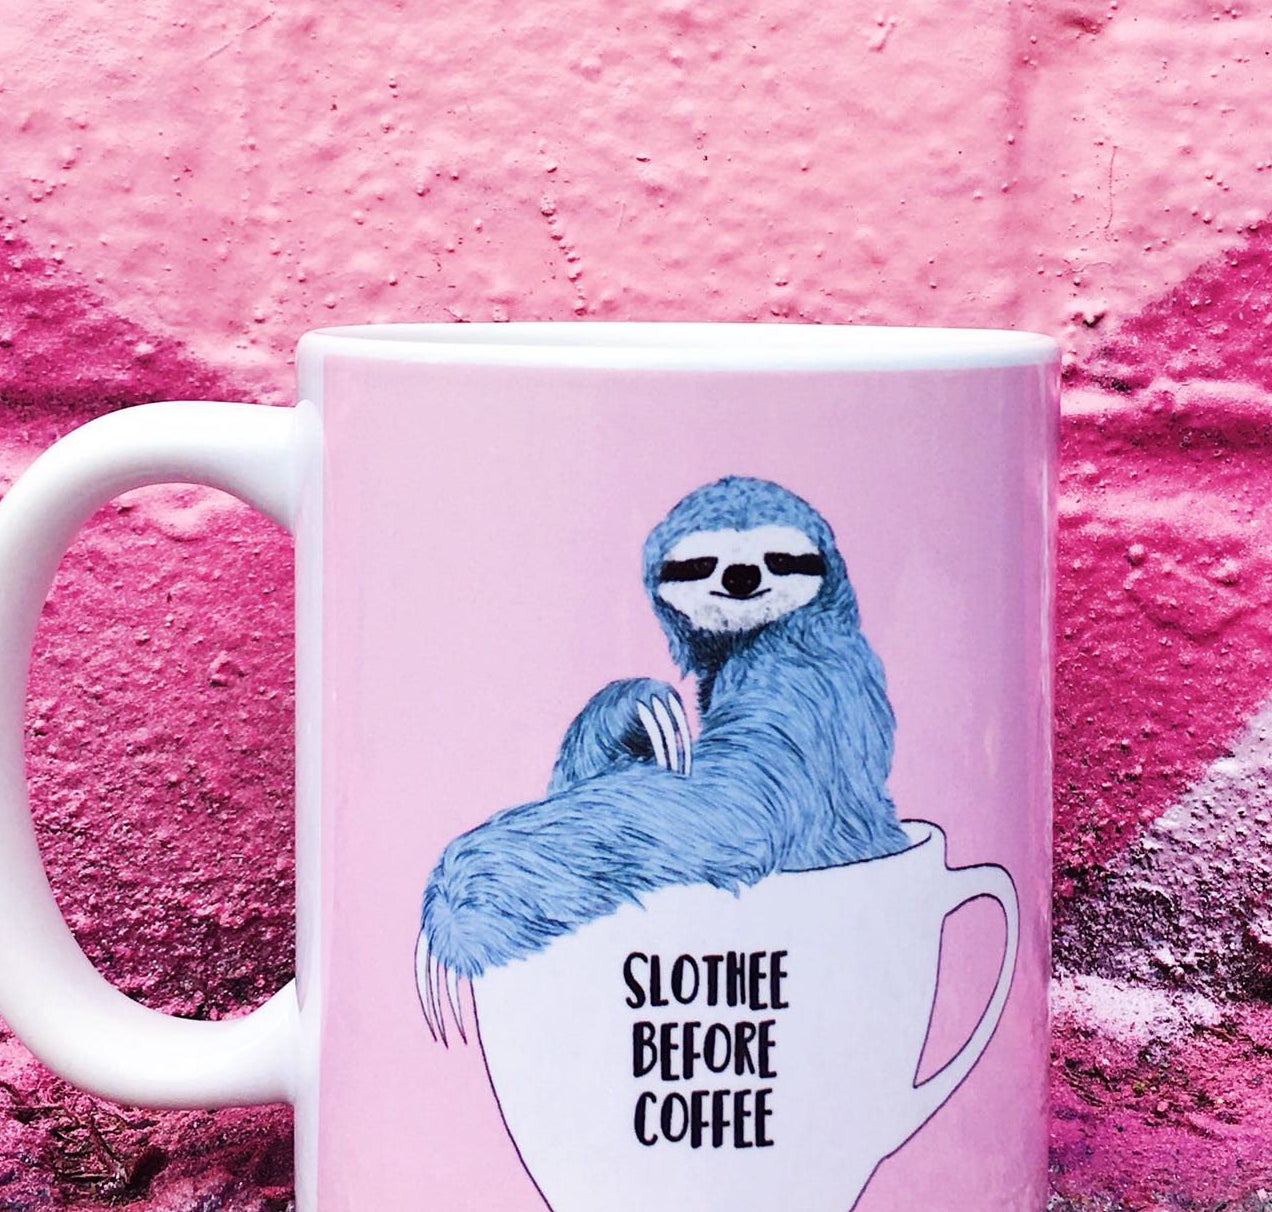 33 Ridiculously Funny Coffee Mugs That Will Have You Laughing Your